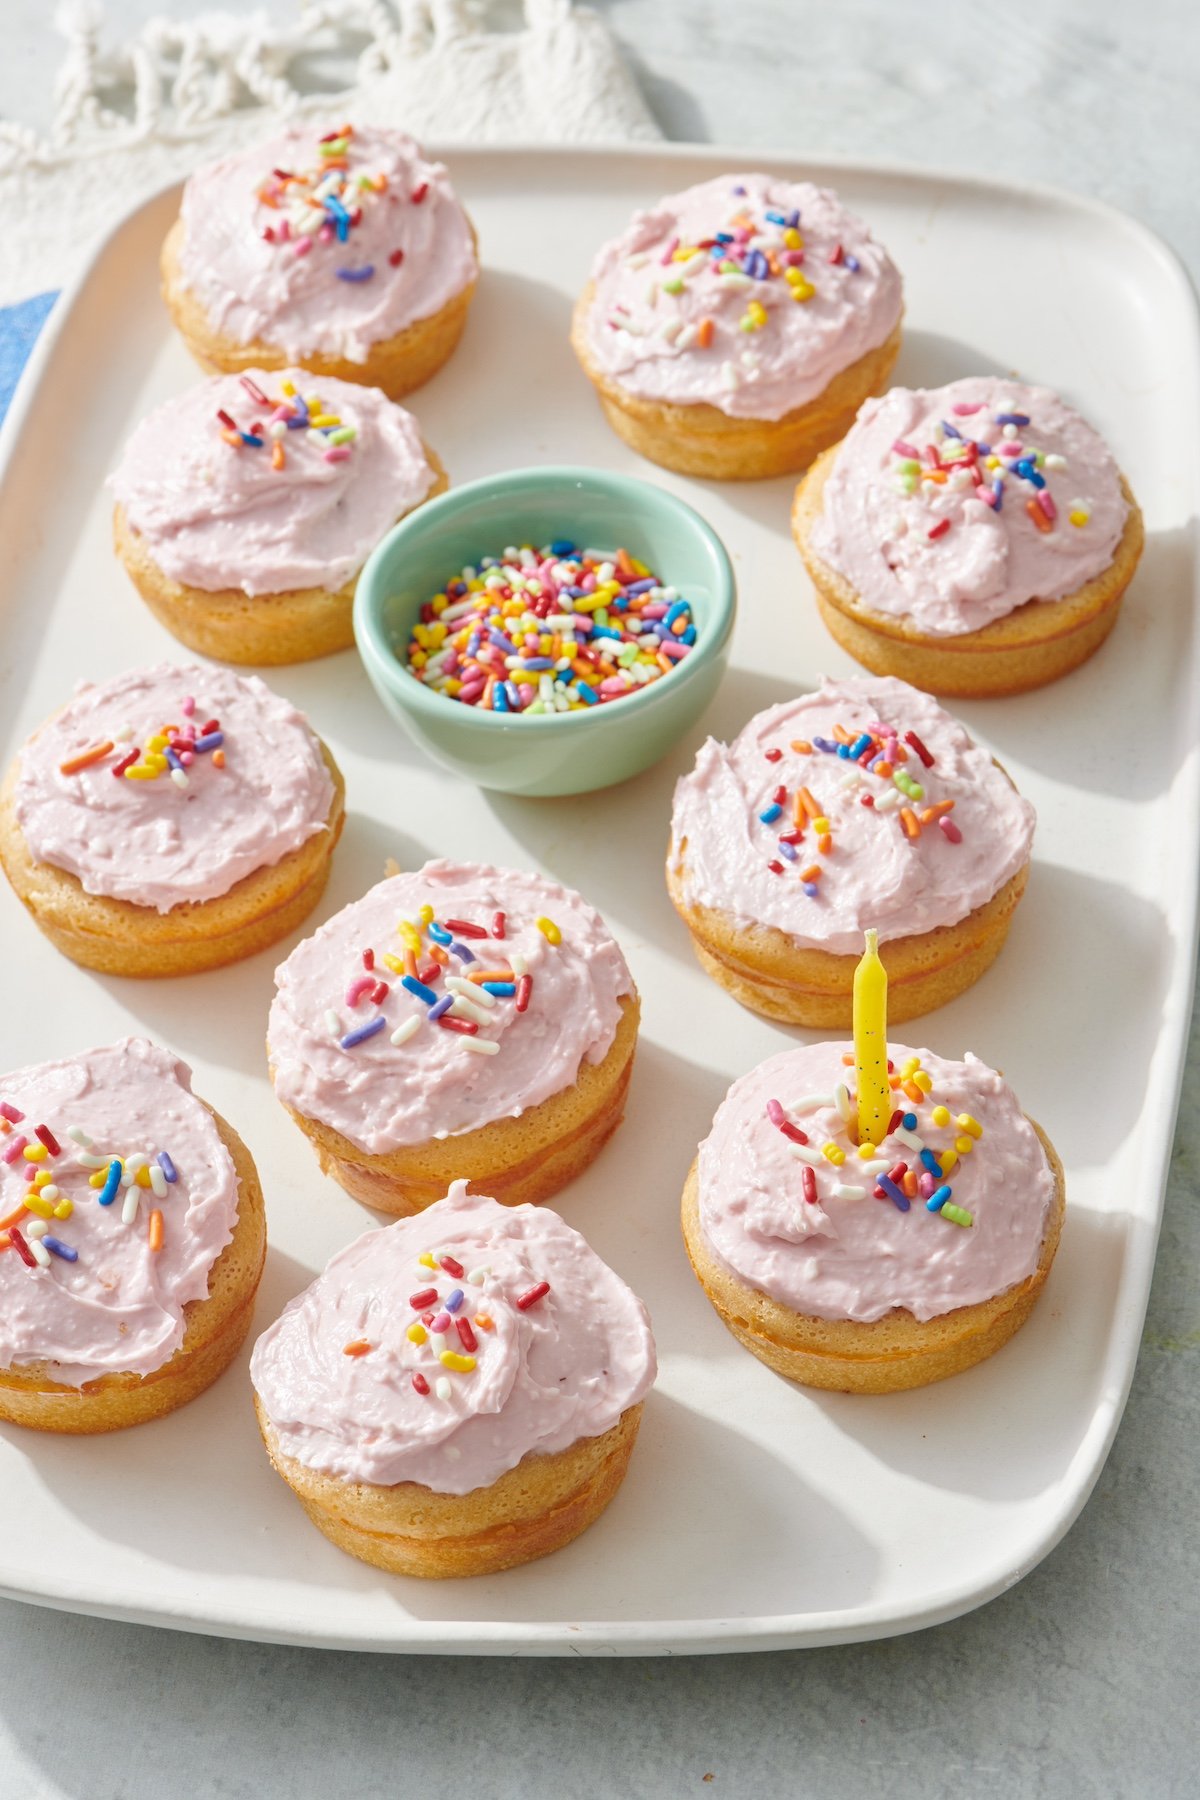 A serving platter with 10 breakfast cupcakes with jelly frosting and rainbow colored sprinkles. 